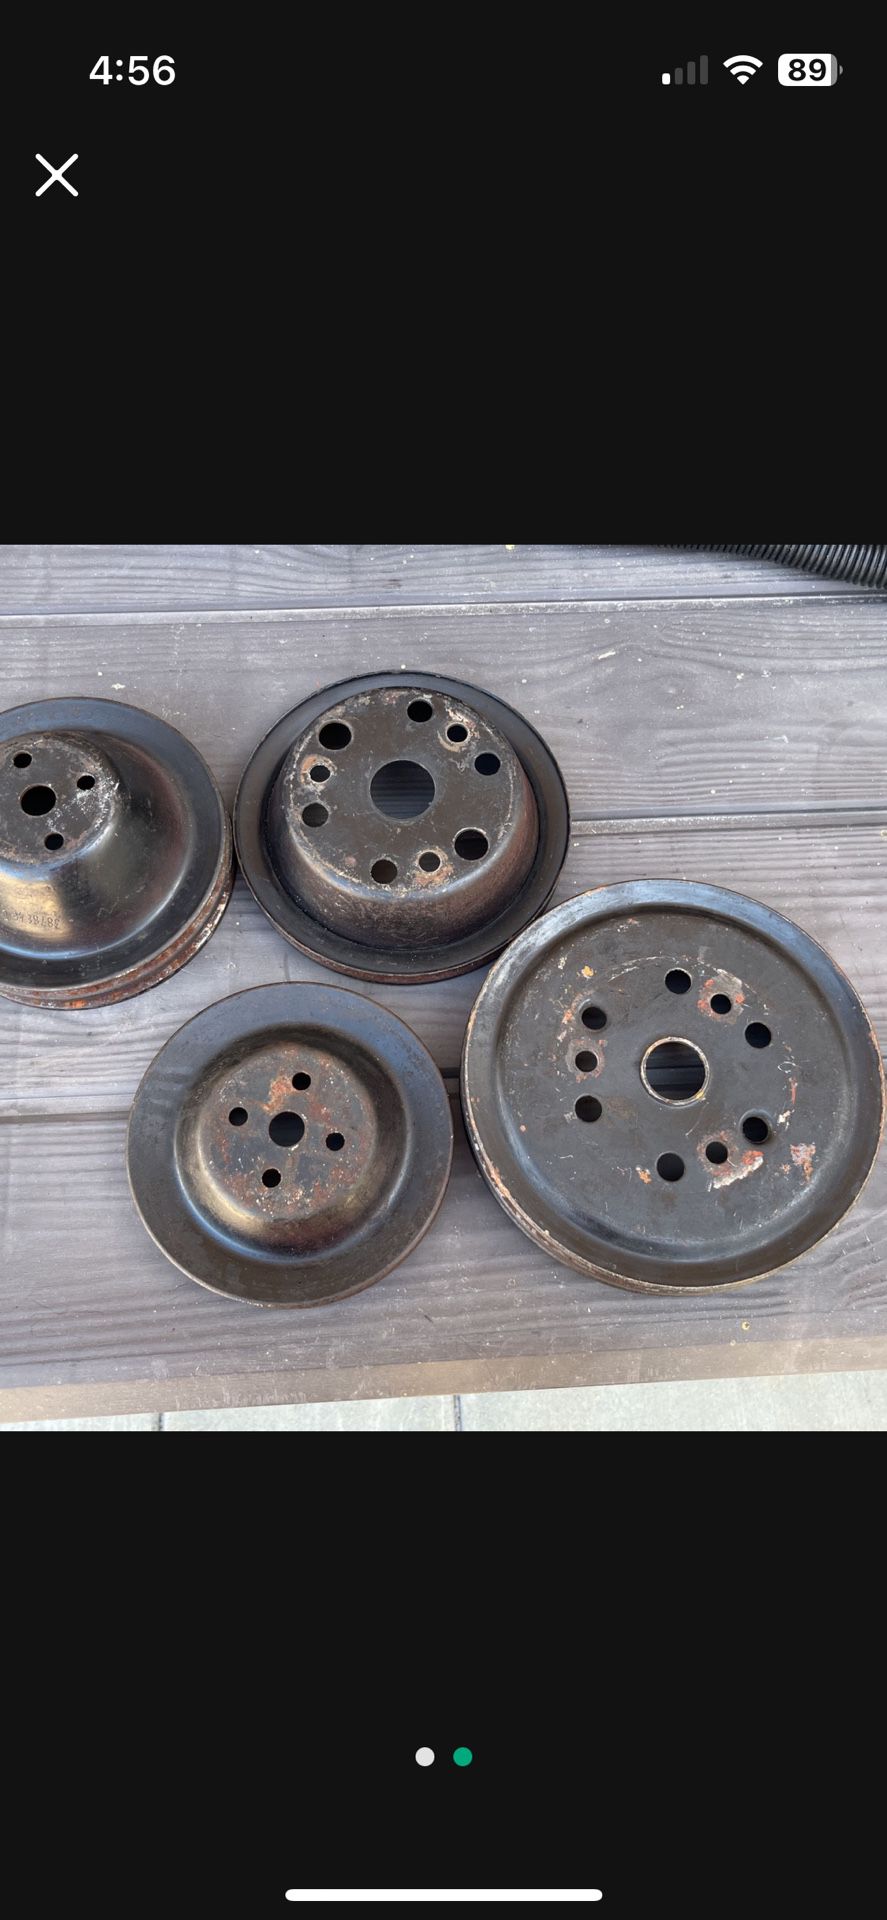  Chevy Corvette Pulley